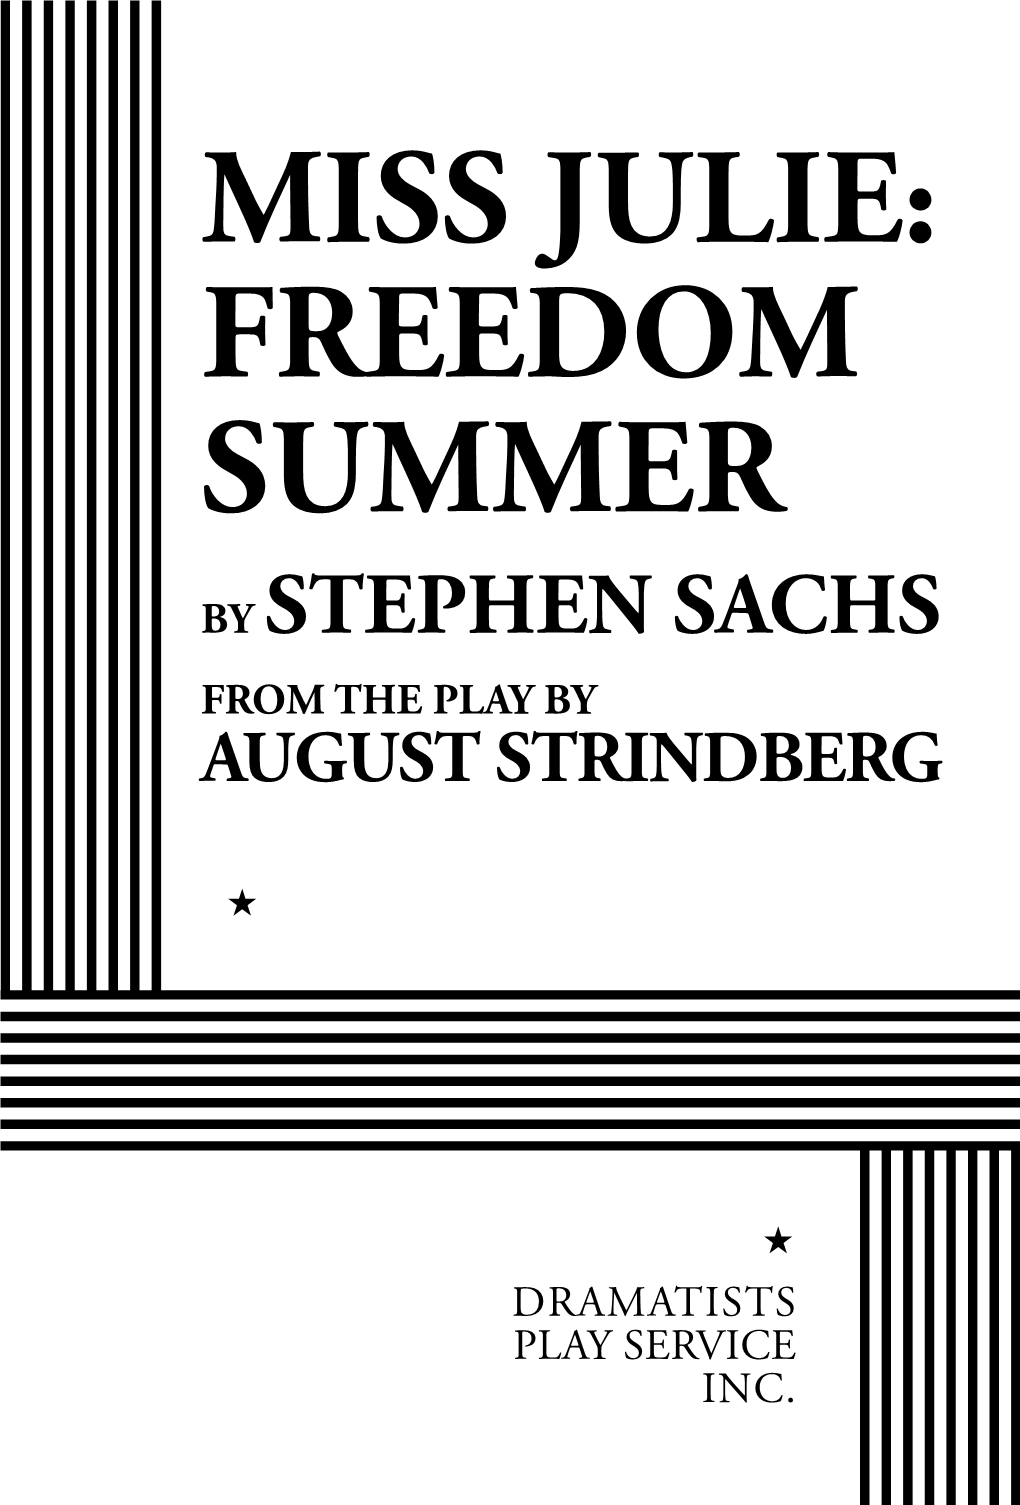 Miss Julie: Freedom Summer by Stephen Sachs from the Play by August Strindberg